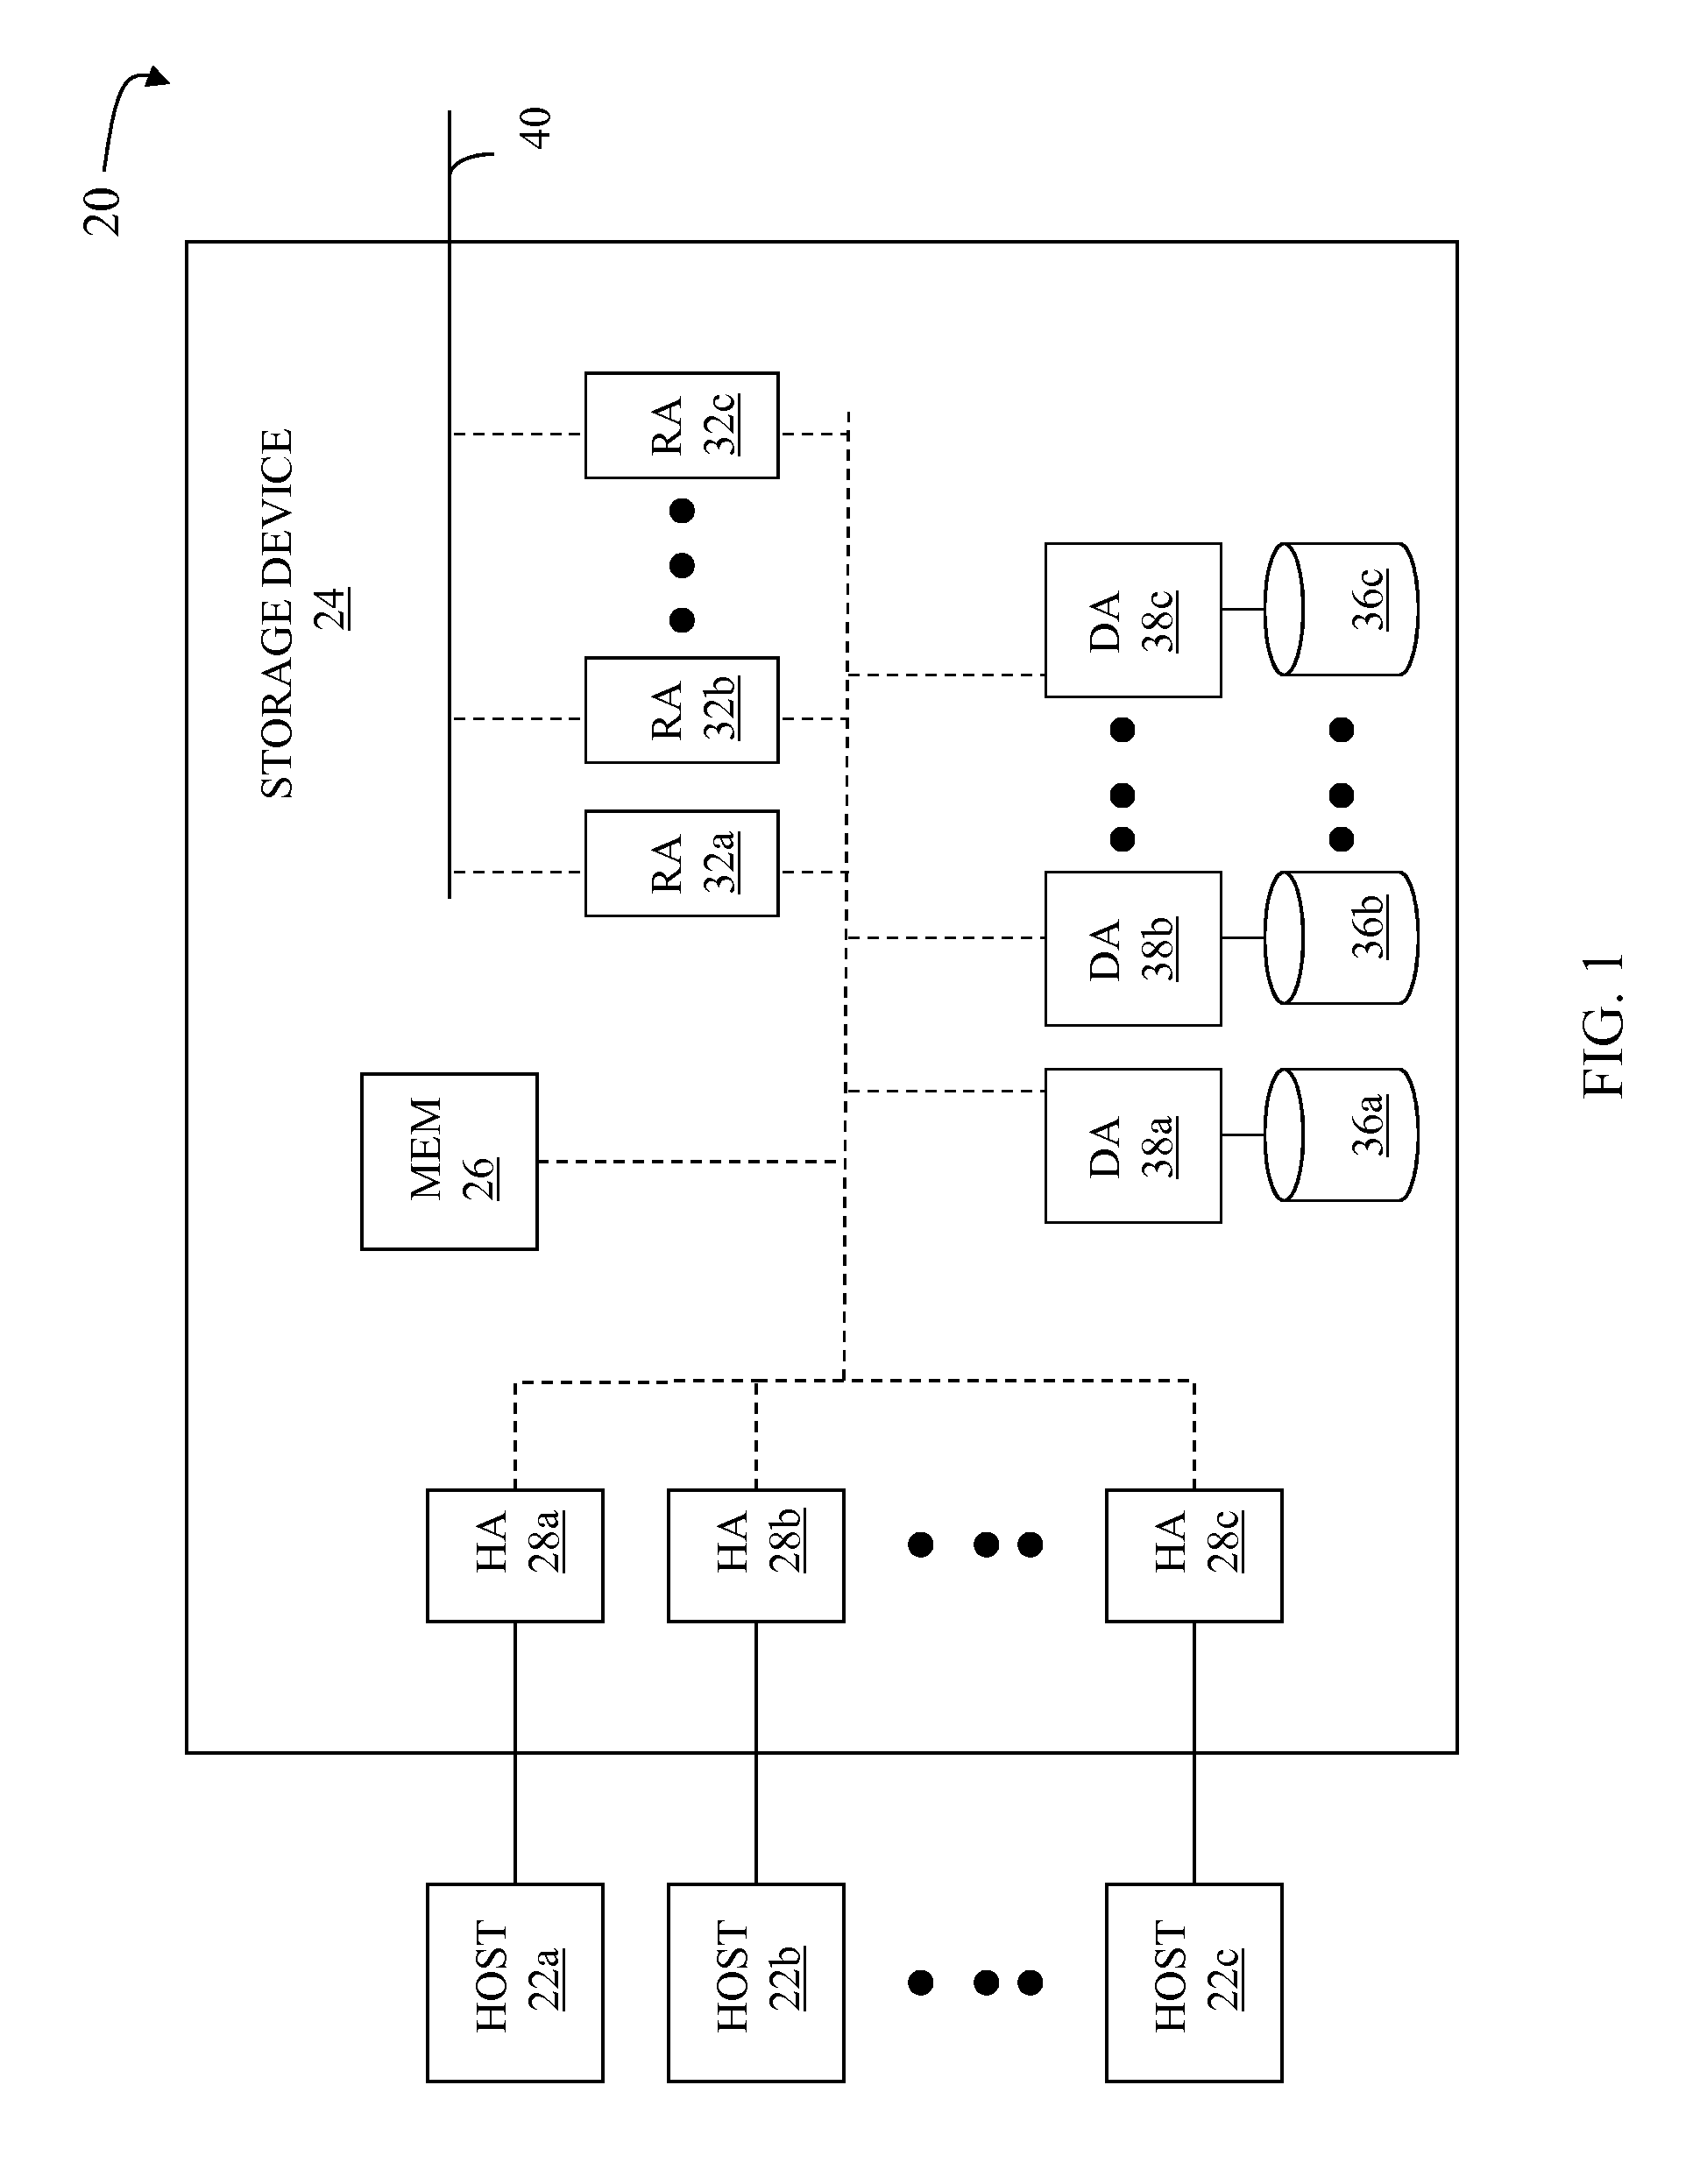 Native storage data collection using multiple data collection plug-ins installed in a component separate from data sources of one or more storage area networks